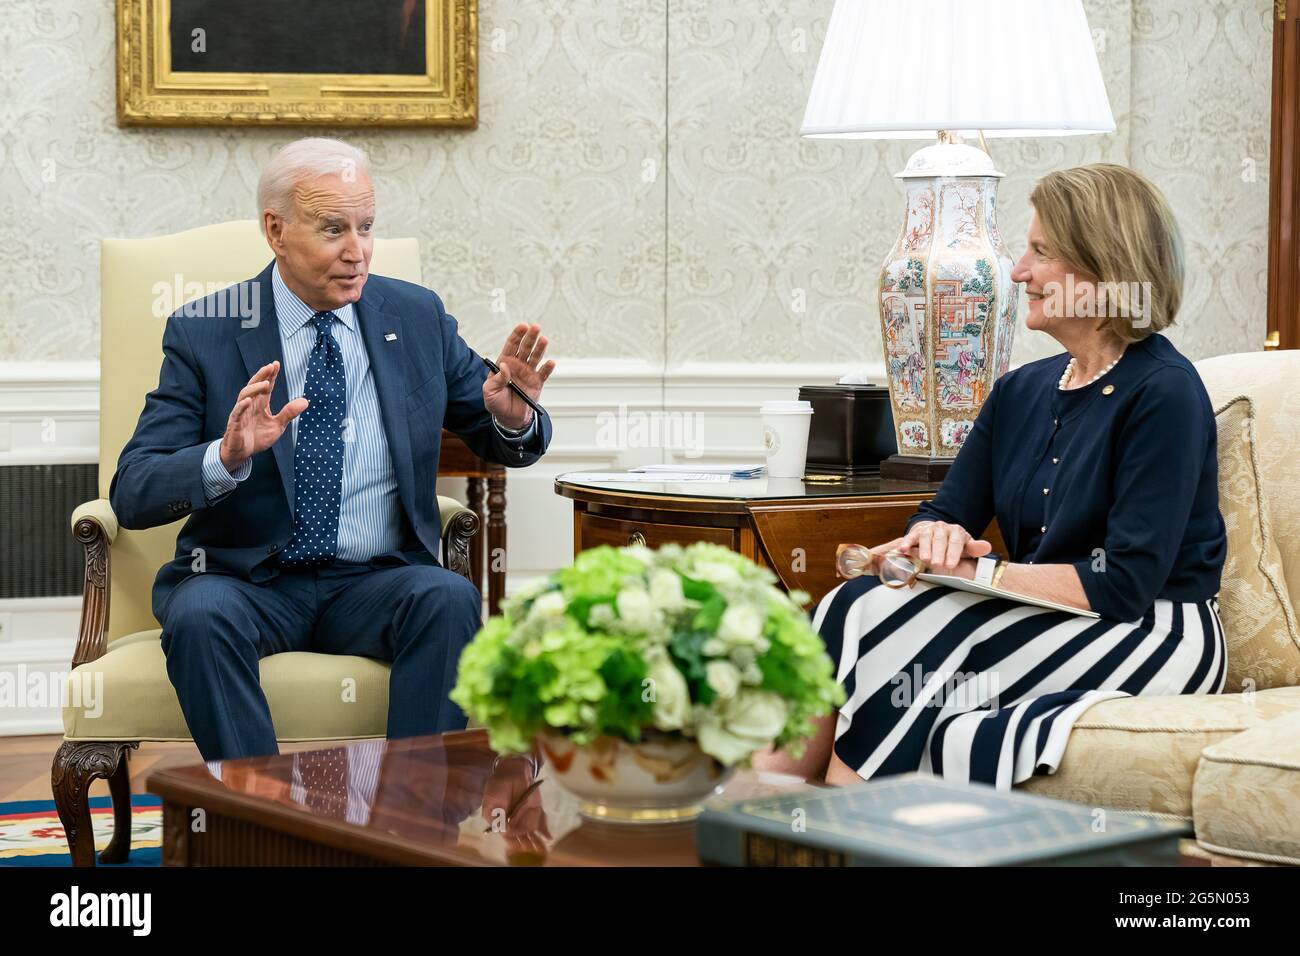 President Joe Biden meets with U.S. Senator Shelley Moore Capito, R-W.V. to talk about passing an infrastructure bill on Wednesday, June 2, 2021 in the Oval Office of the White House. (Official White House Photo by Adam Schultz) Stock Photo